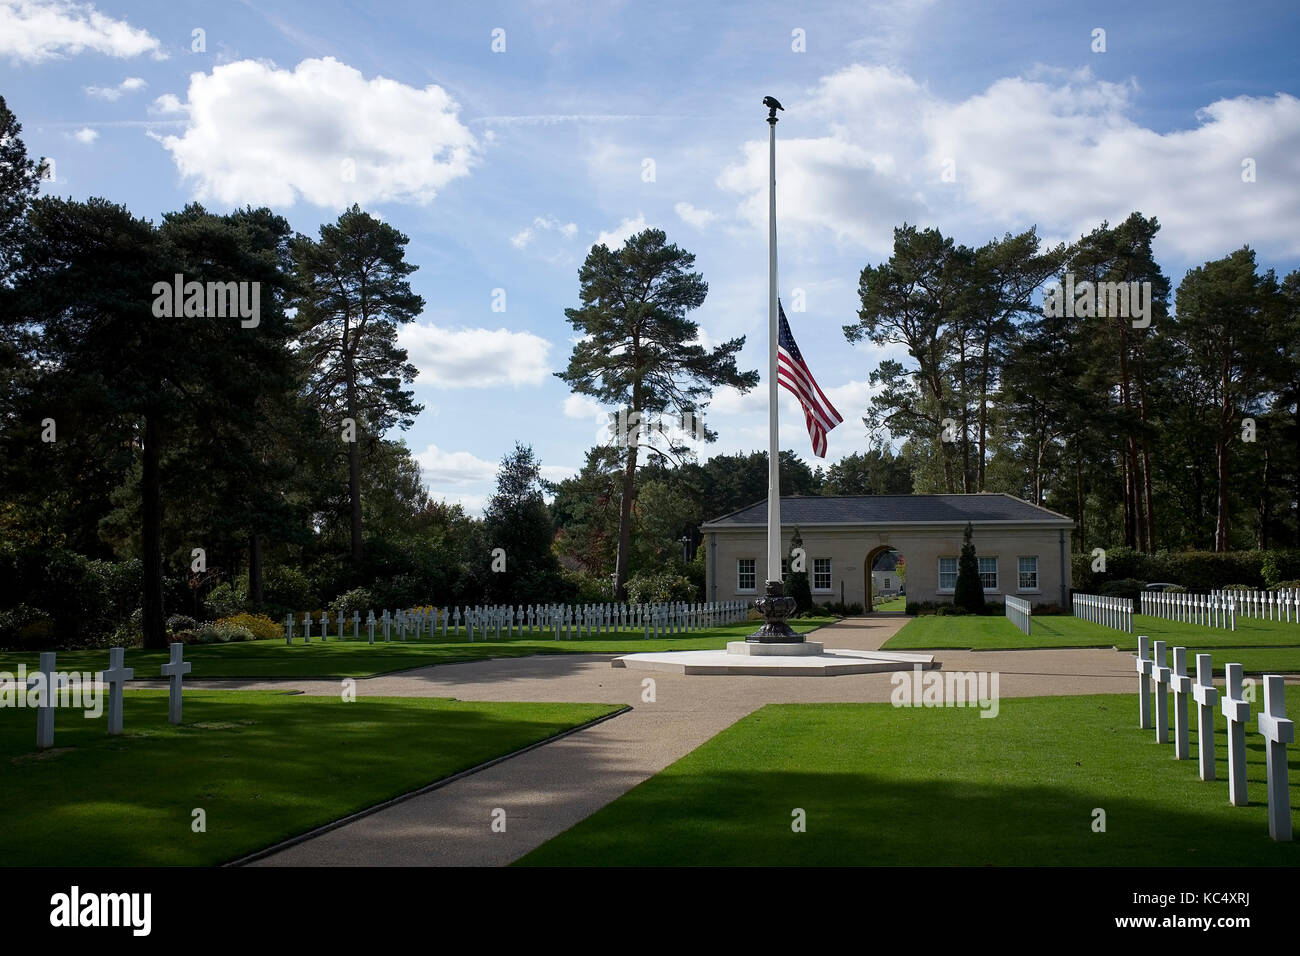 American Battle Monuments Great War Cemetery UK where by Presidential decree the flag of the United States is flown at half-mast in solidarity with the victims of the Las Vegas shooting. Stock Photo